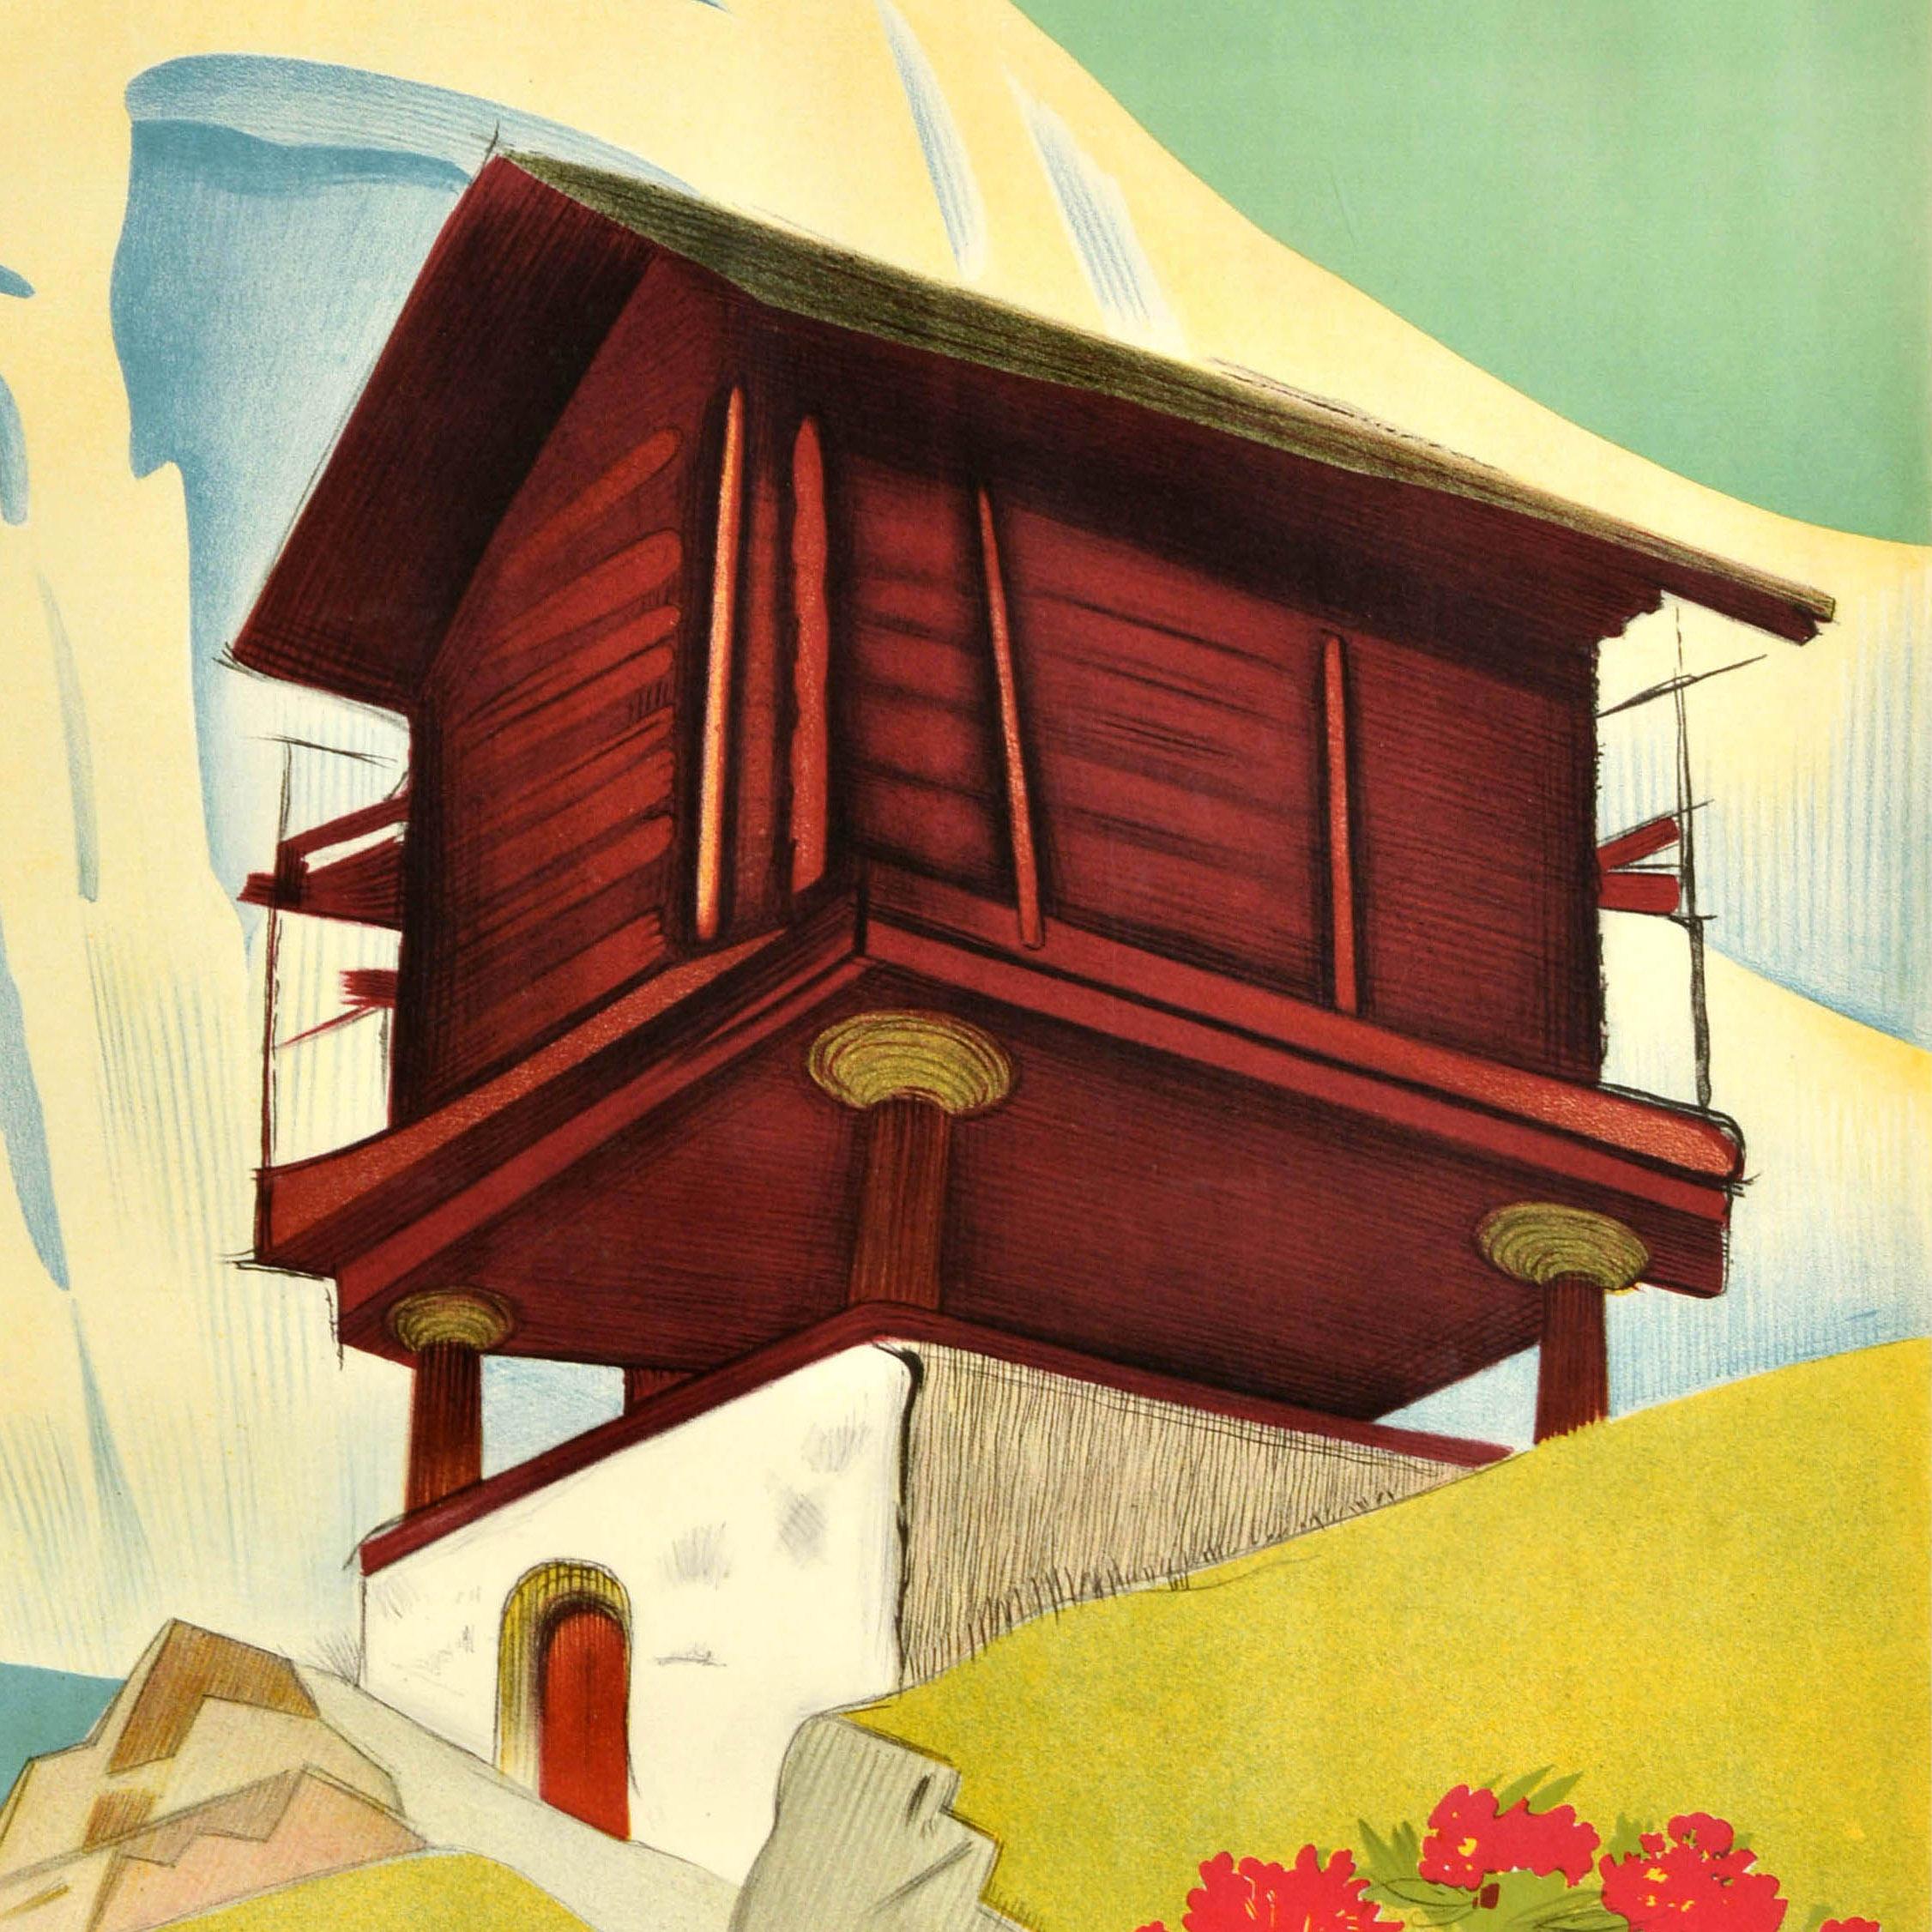 Original vintage Switzerland travel advertising poster - Zinal Valais Suisse - featuring a picturesque hillside view by Erich Hermes (1881-1971) depicting the iconic snow topped Matterhorn mountain with a traditional stone and wood chalet farmhouse